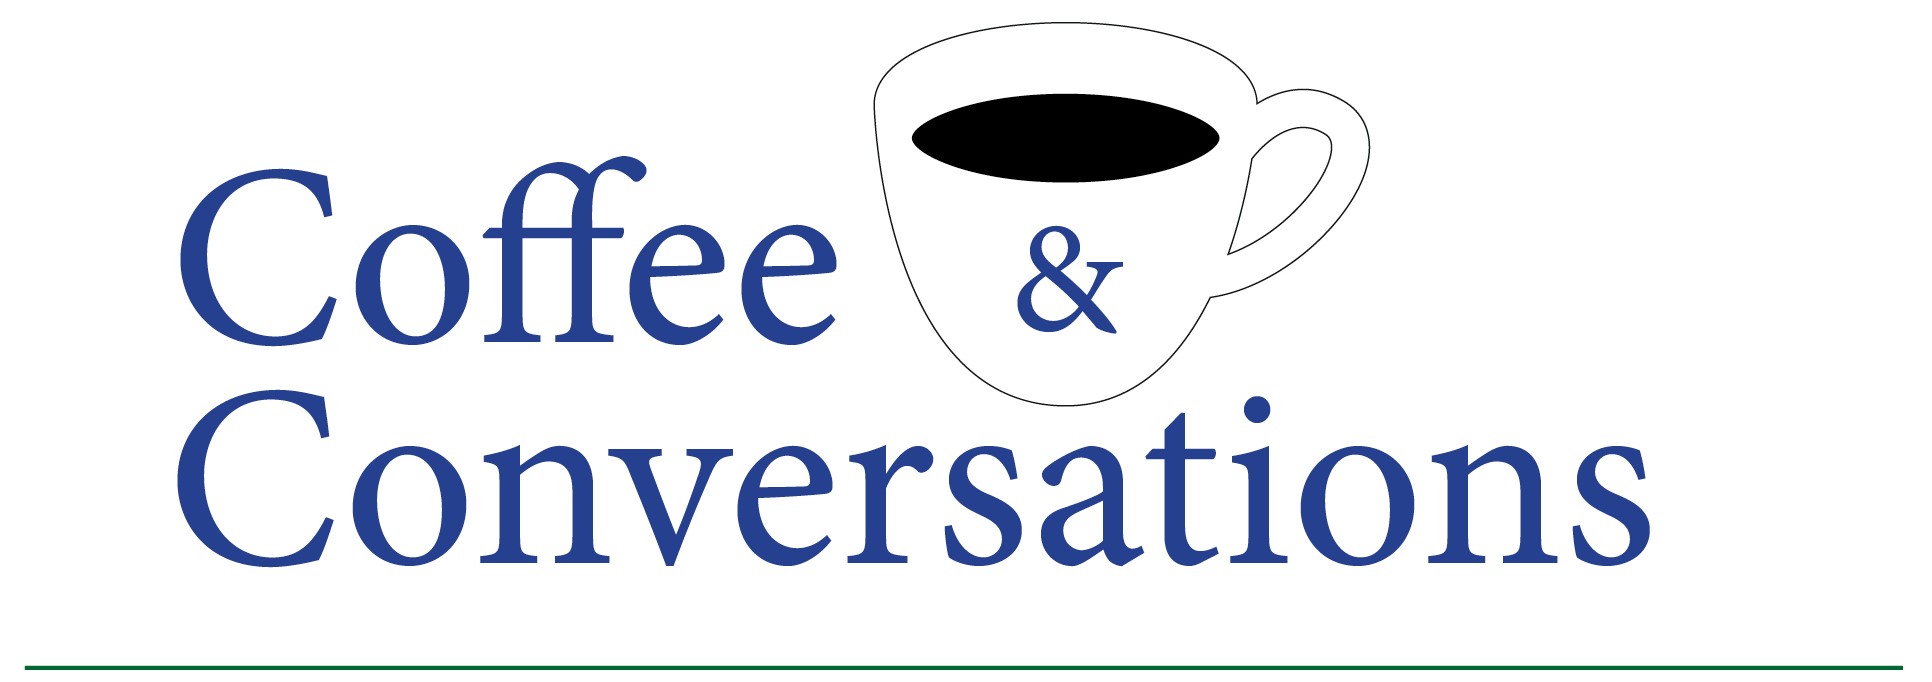 Coffee and Conversations: The NH Charter School System image.